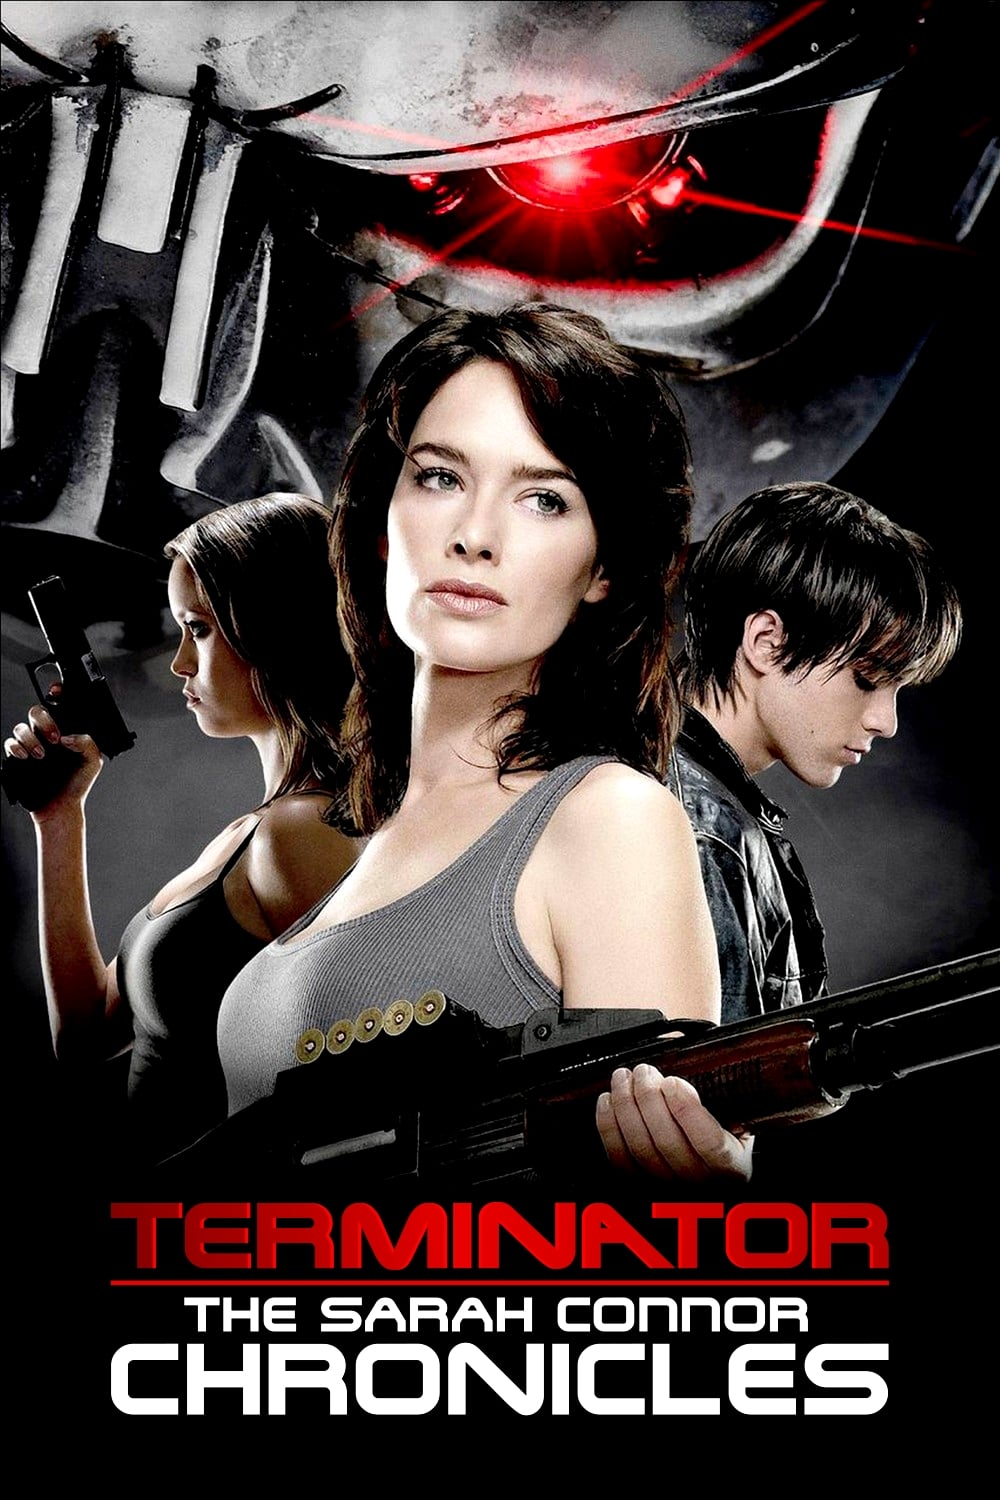 Terminator: The Sarah Connor Chronicles TV Shows About Cyborg